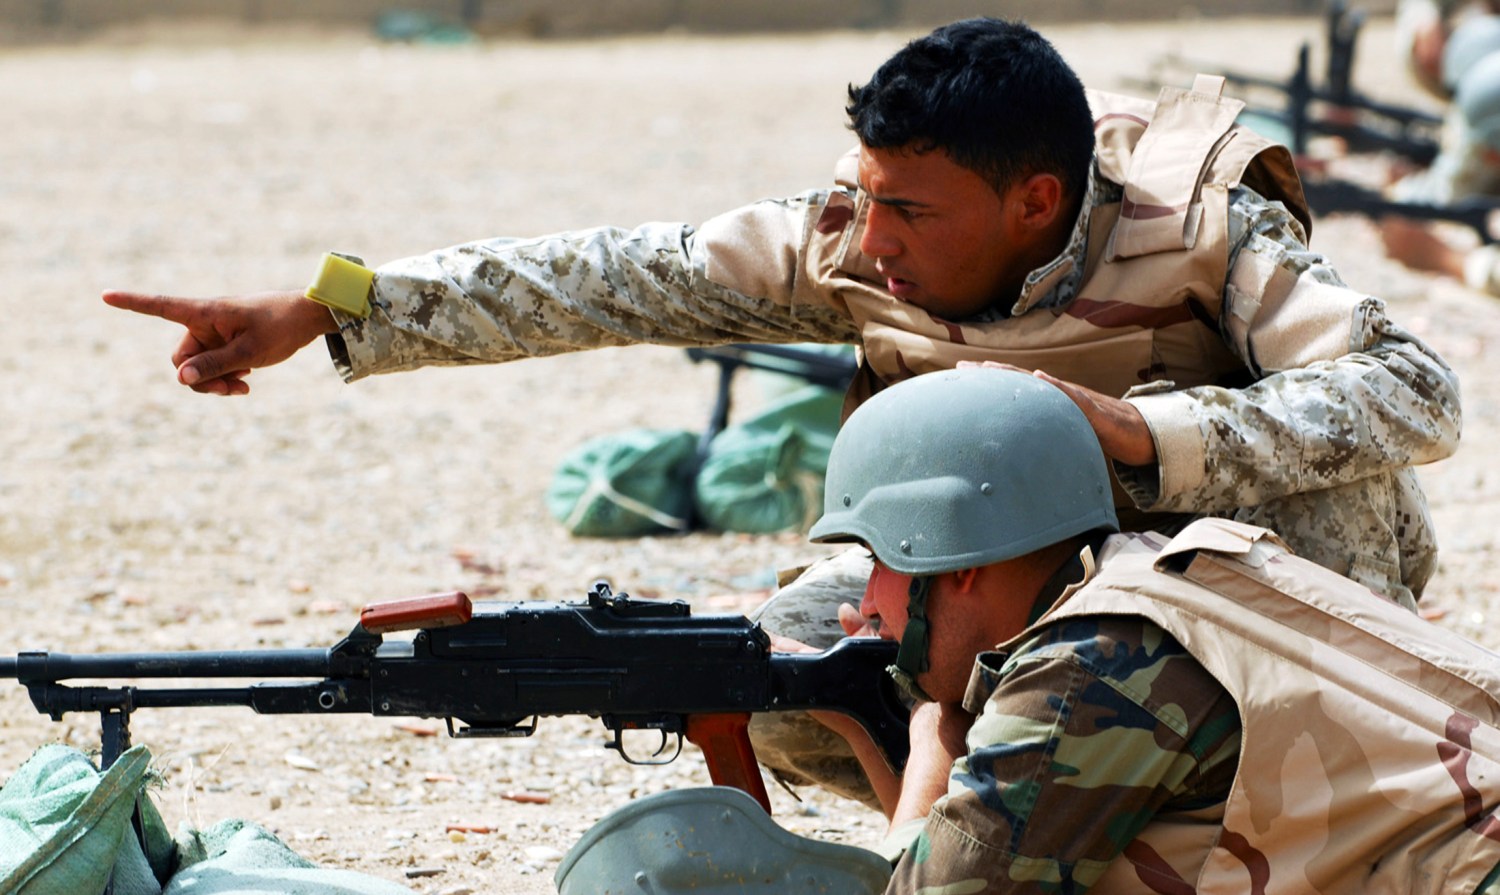 Iraqi army soldiers with the 6th IA Division familiarize themselves with their targets and prepare for a PKC machine gun range at Combat Outpost 402 at al-Muthana airfield in the Rusafa district of Baghdad September 28, 2009. In addition to marksmanship, the IAs also trained on room clearing and movement under fire as part of a larger training program conducted by Soldiers of D Troop, Division Special Troops Battalion, 1st Cavalry Division. Picture taken September 28, 2009. REUTERS/U.S Army/Sgt. Joshua Risner/Handout (IRAQ CONFLICT POLITICS MILITARY) FOR EDITORIAL USE ONLY. NOT FOR SALE FOR MARKETING OR ADVERTISING CAMPAIGNS - RTXP3I3